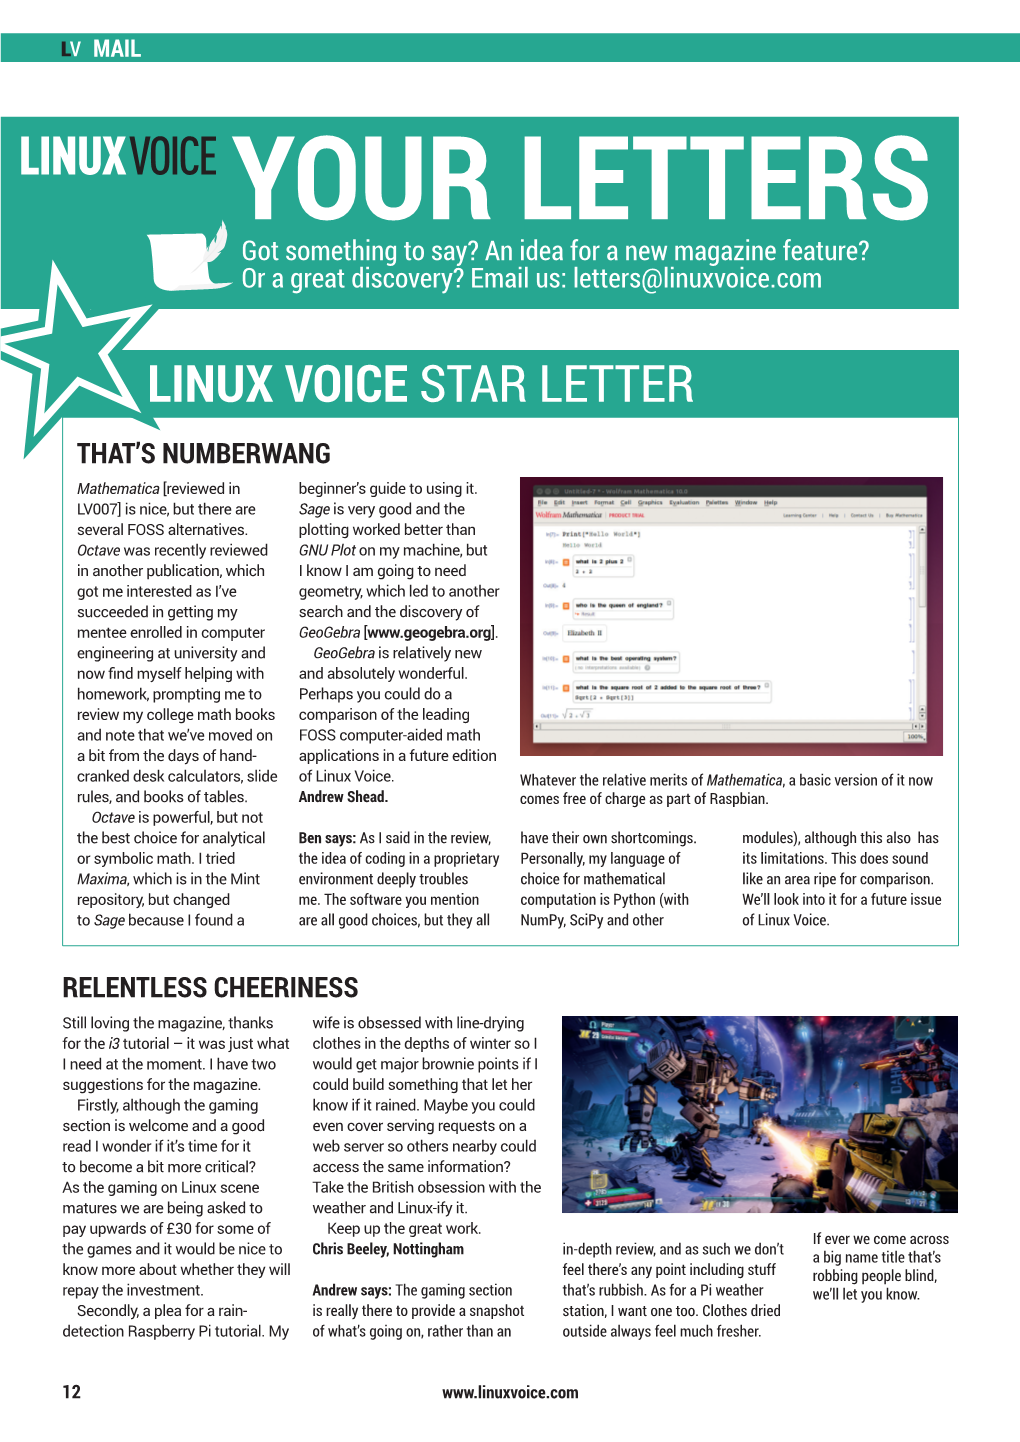 YOUR LETTERS Got Something to Say? an Idea for a New Magazine Feature? Or a Great Discovery? Email Us: Letters@Linuxvoice.Com